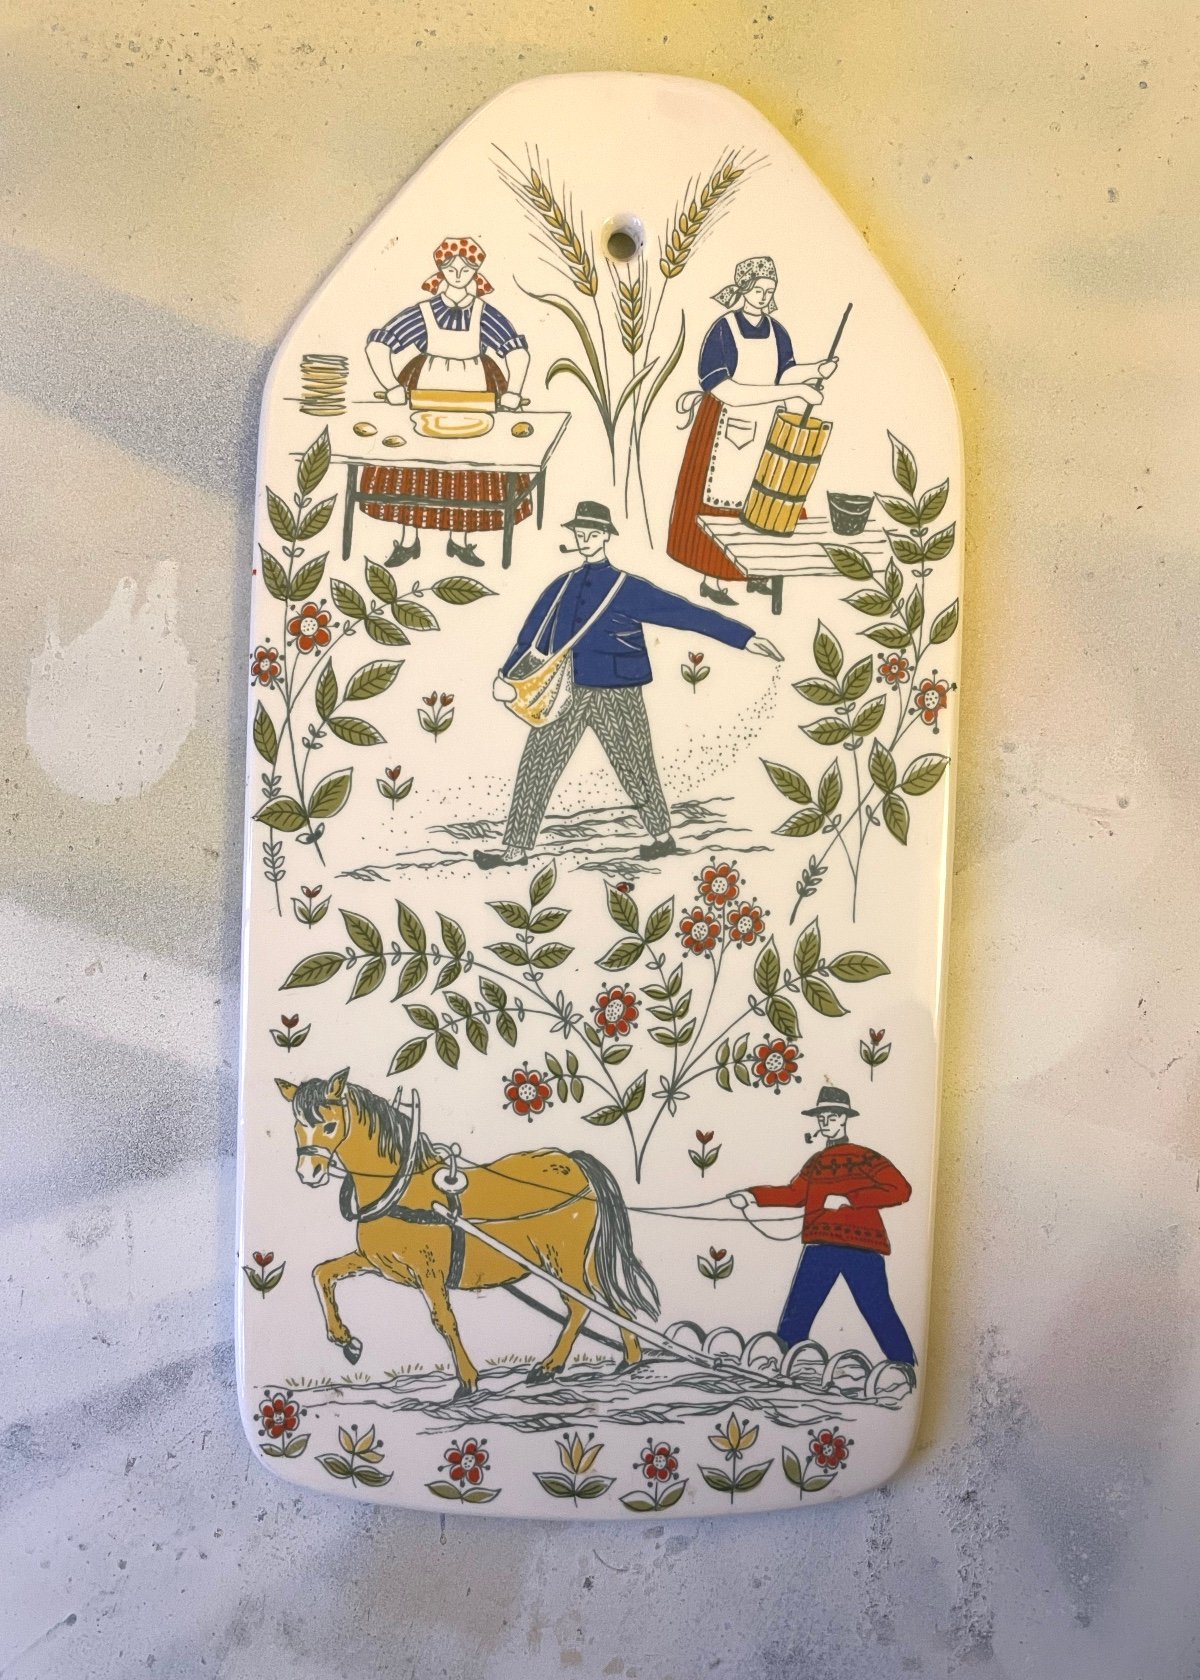 Image of Figgjo Flint Made in Norway  - Vintage Ceramic Wall Plaque or Trivet